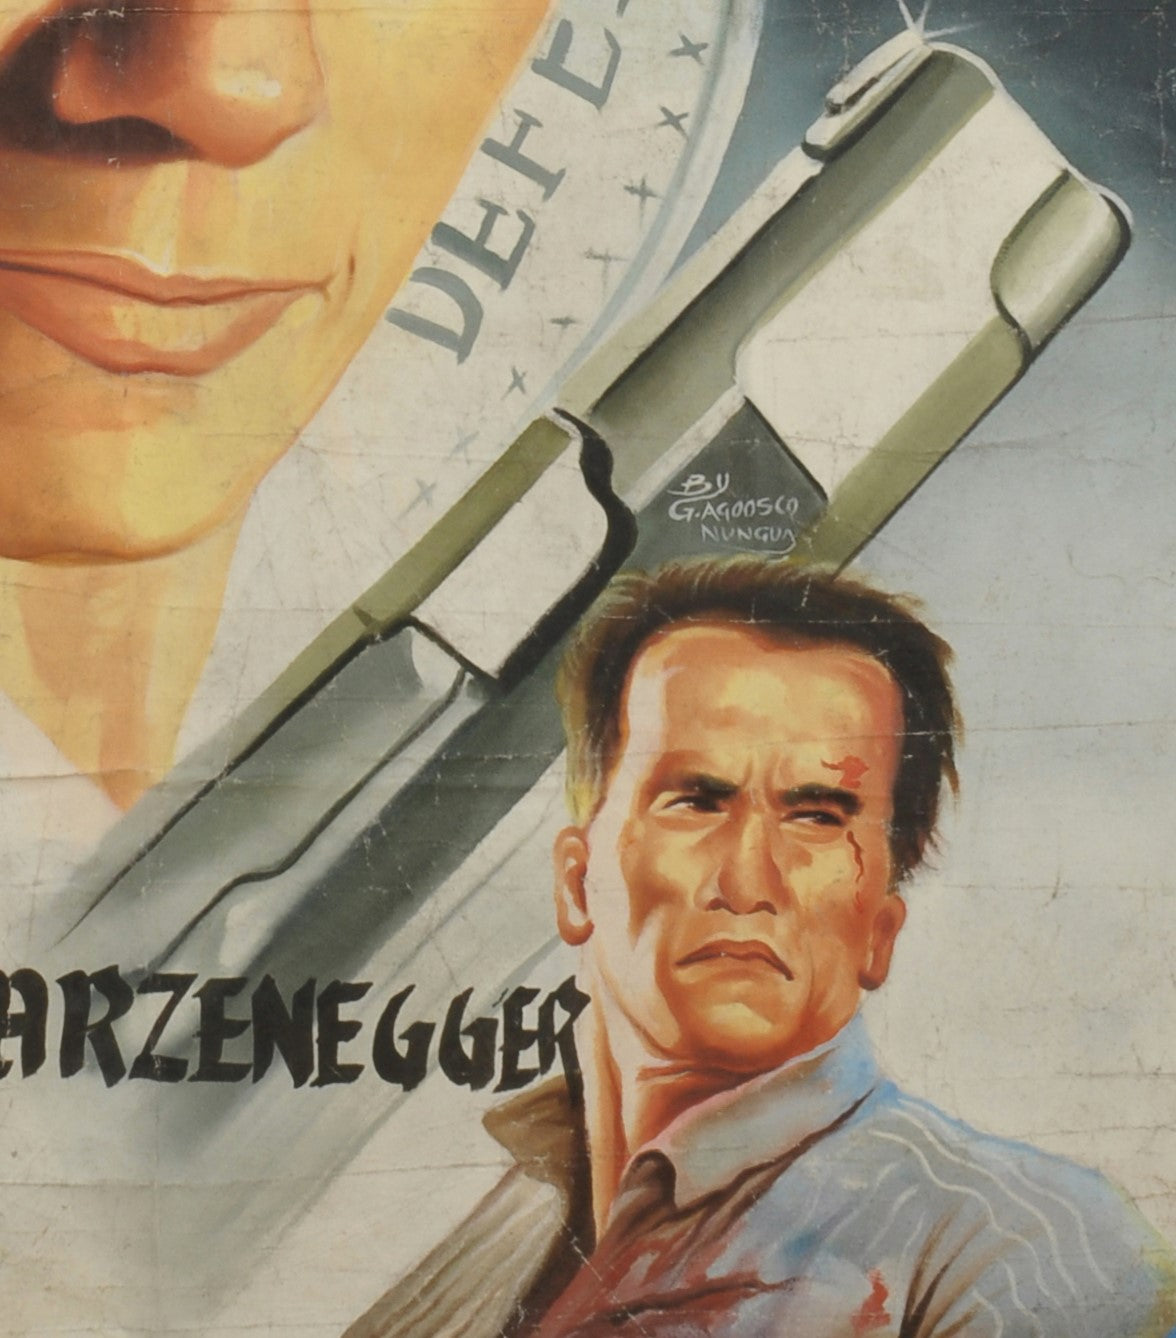 TRUE LIES MOVIE POSTER HAND PAINTED IN GHANA WEST AFRICA FOR THE LOCAL CINEMA MORE DETAILS